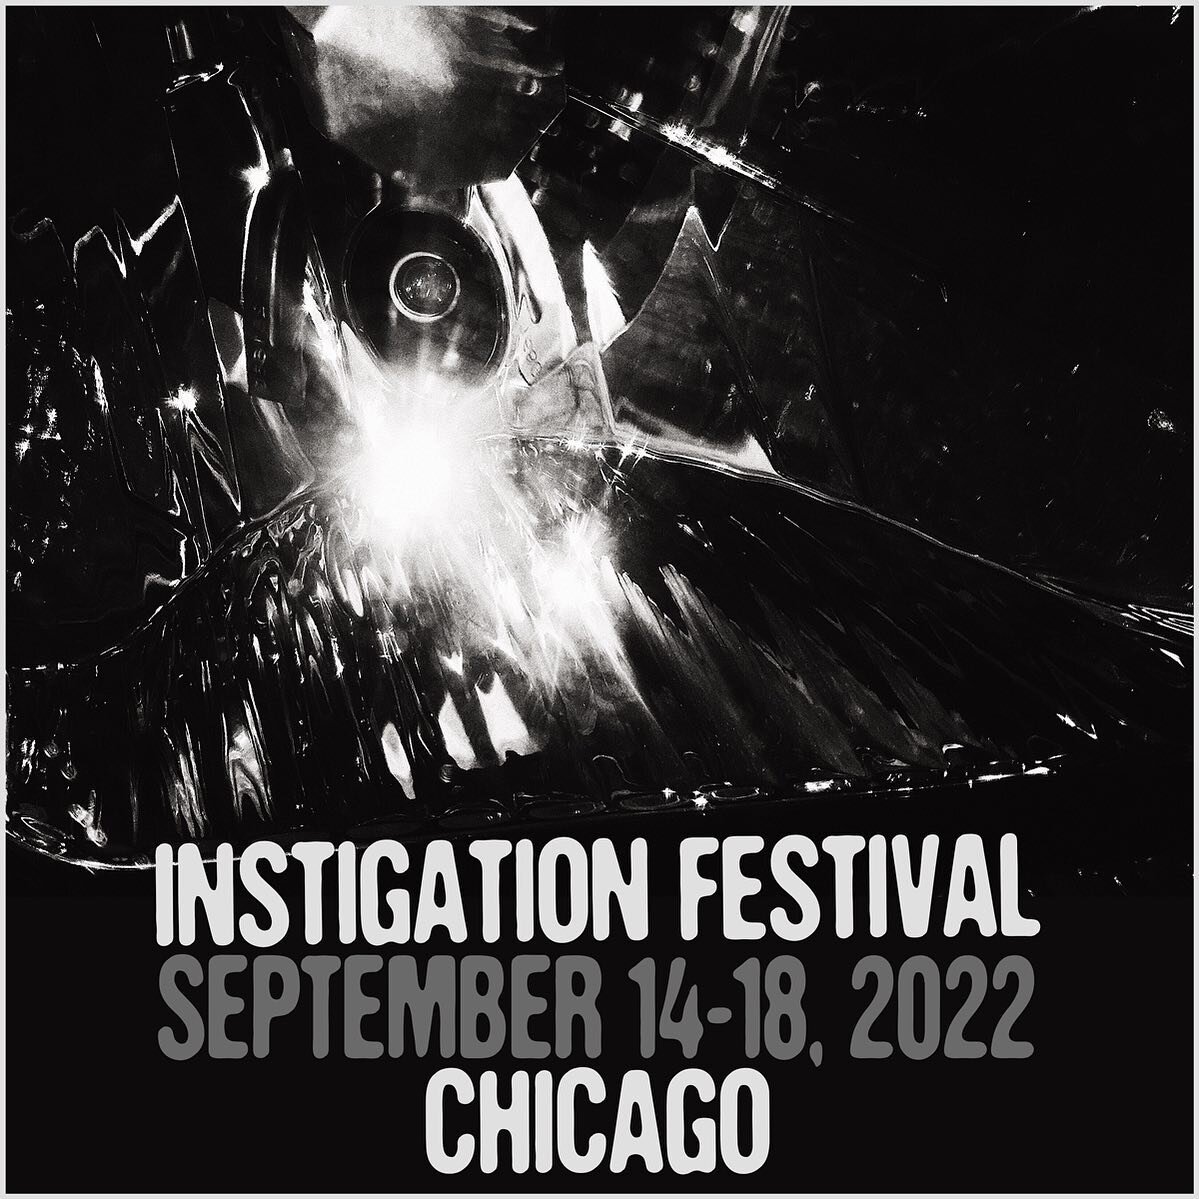 Mark your calendars - the @instigationfestival returns to Chicago for five days of music and movement  featuring over thirty performers from Chicago and New Orleans! Watch this space for a full lineup next week!

9/14 - @constellationchicago 
9/15 - 